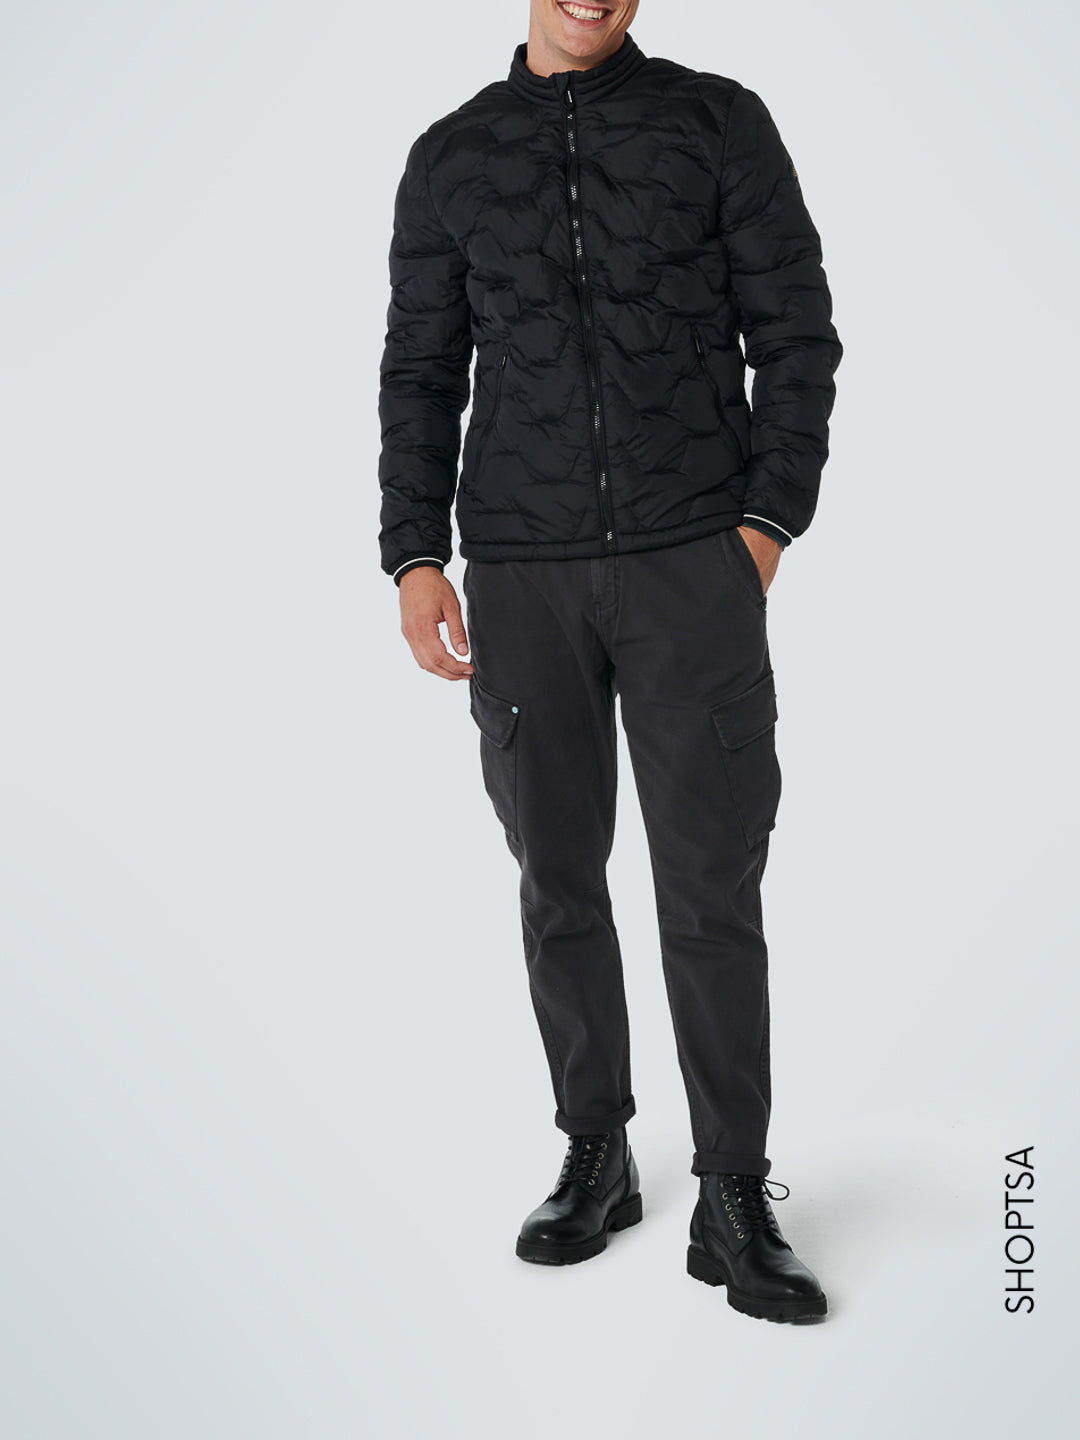 Black quilted jacket - NO EXCESS